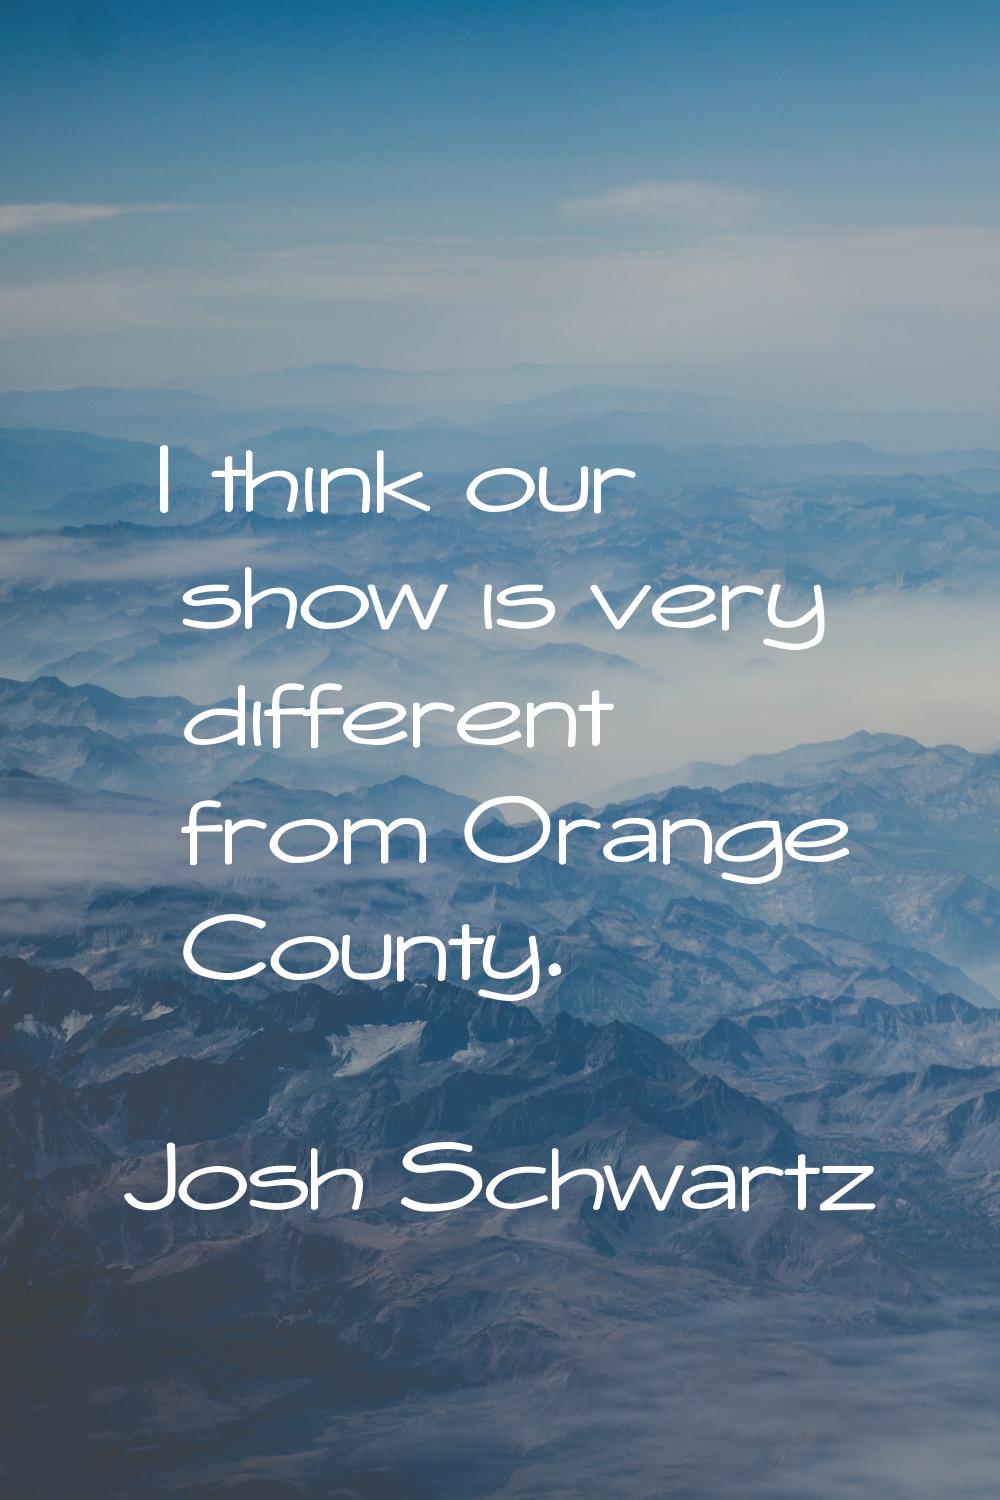 I think our show is very different from Orange County.